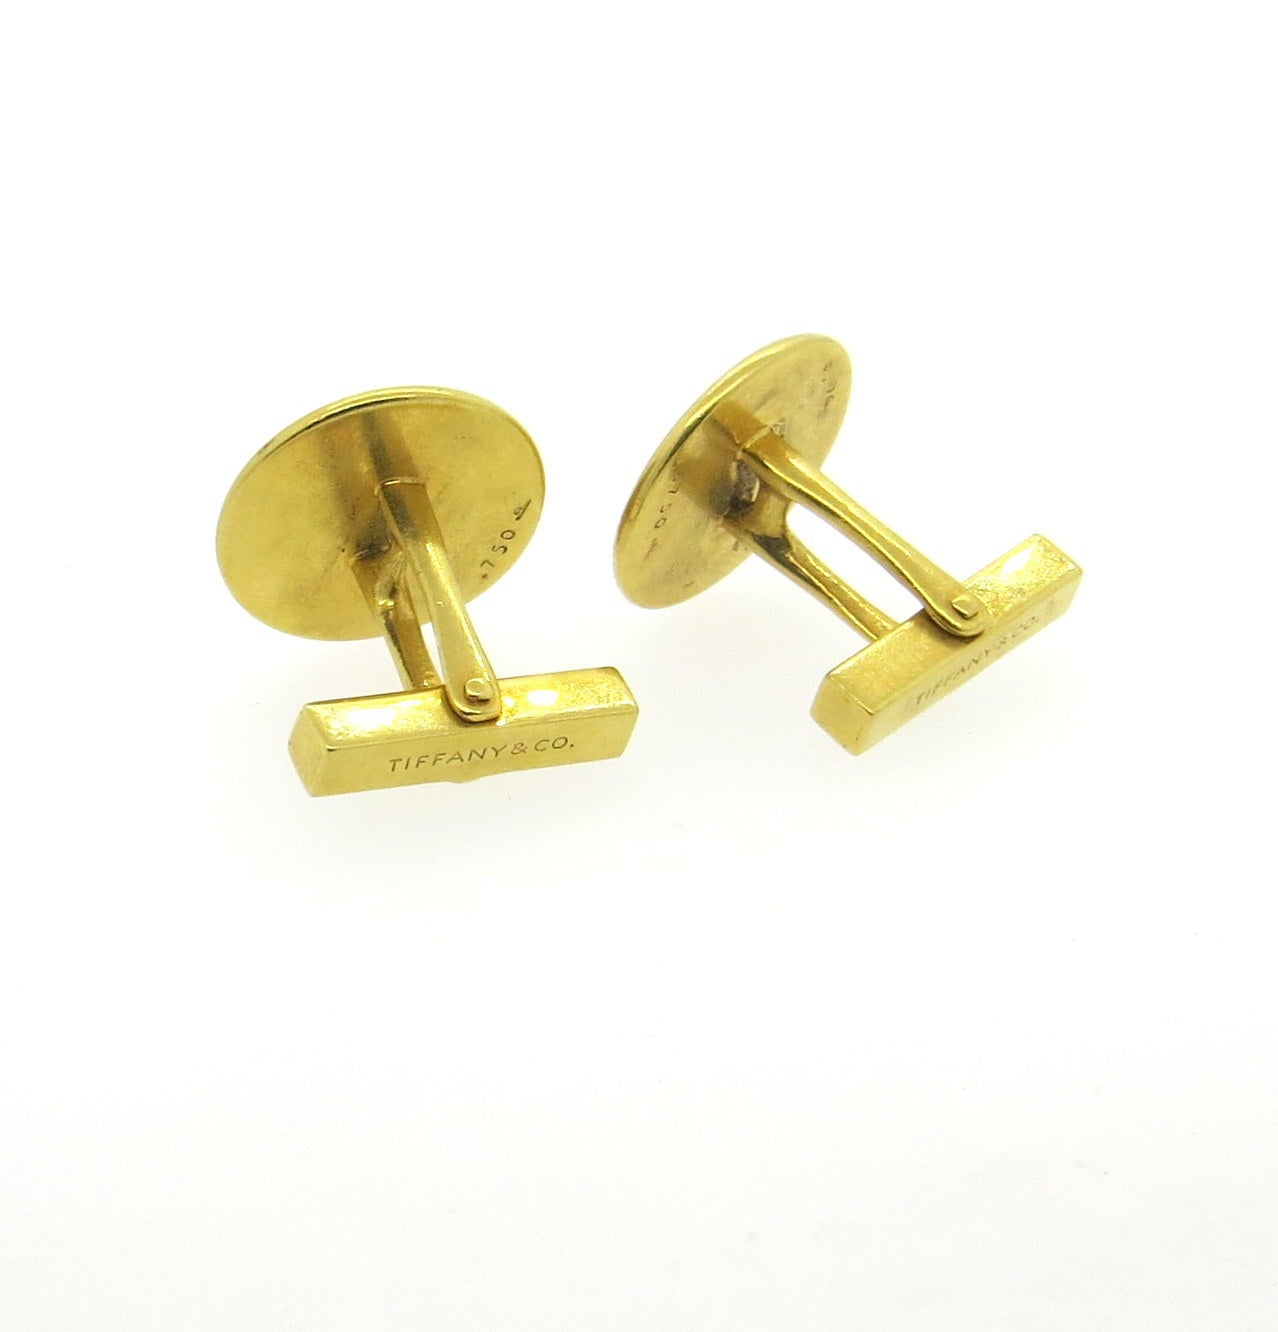 18k yellow gold button cufflinks, designed by Tiffany & Co., measuring 19mm in diameter. Marked Tiffany & Co. and 750. Weight - 18.9 grams